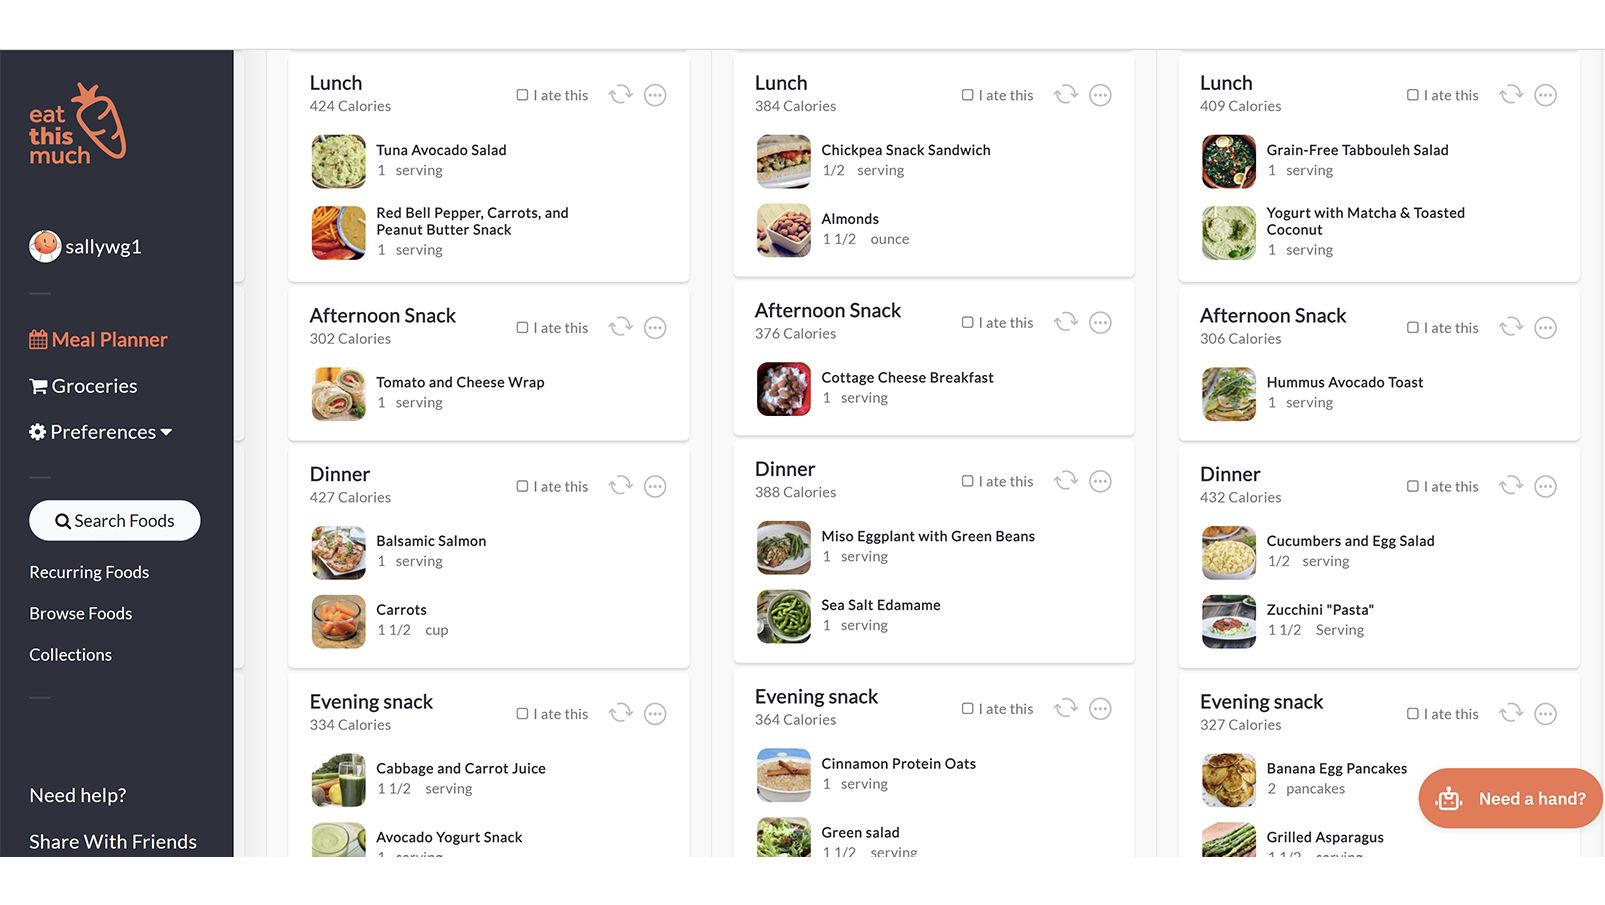 4 helpful meal planning apps for families that really work.